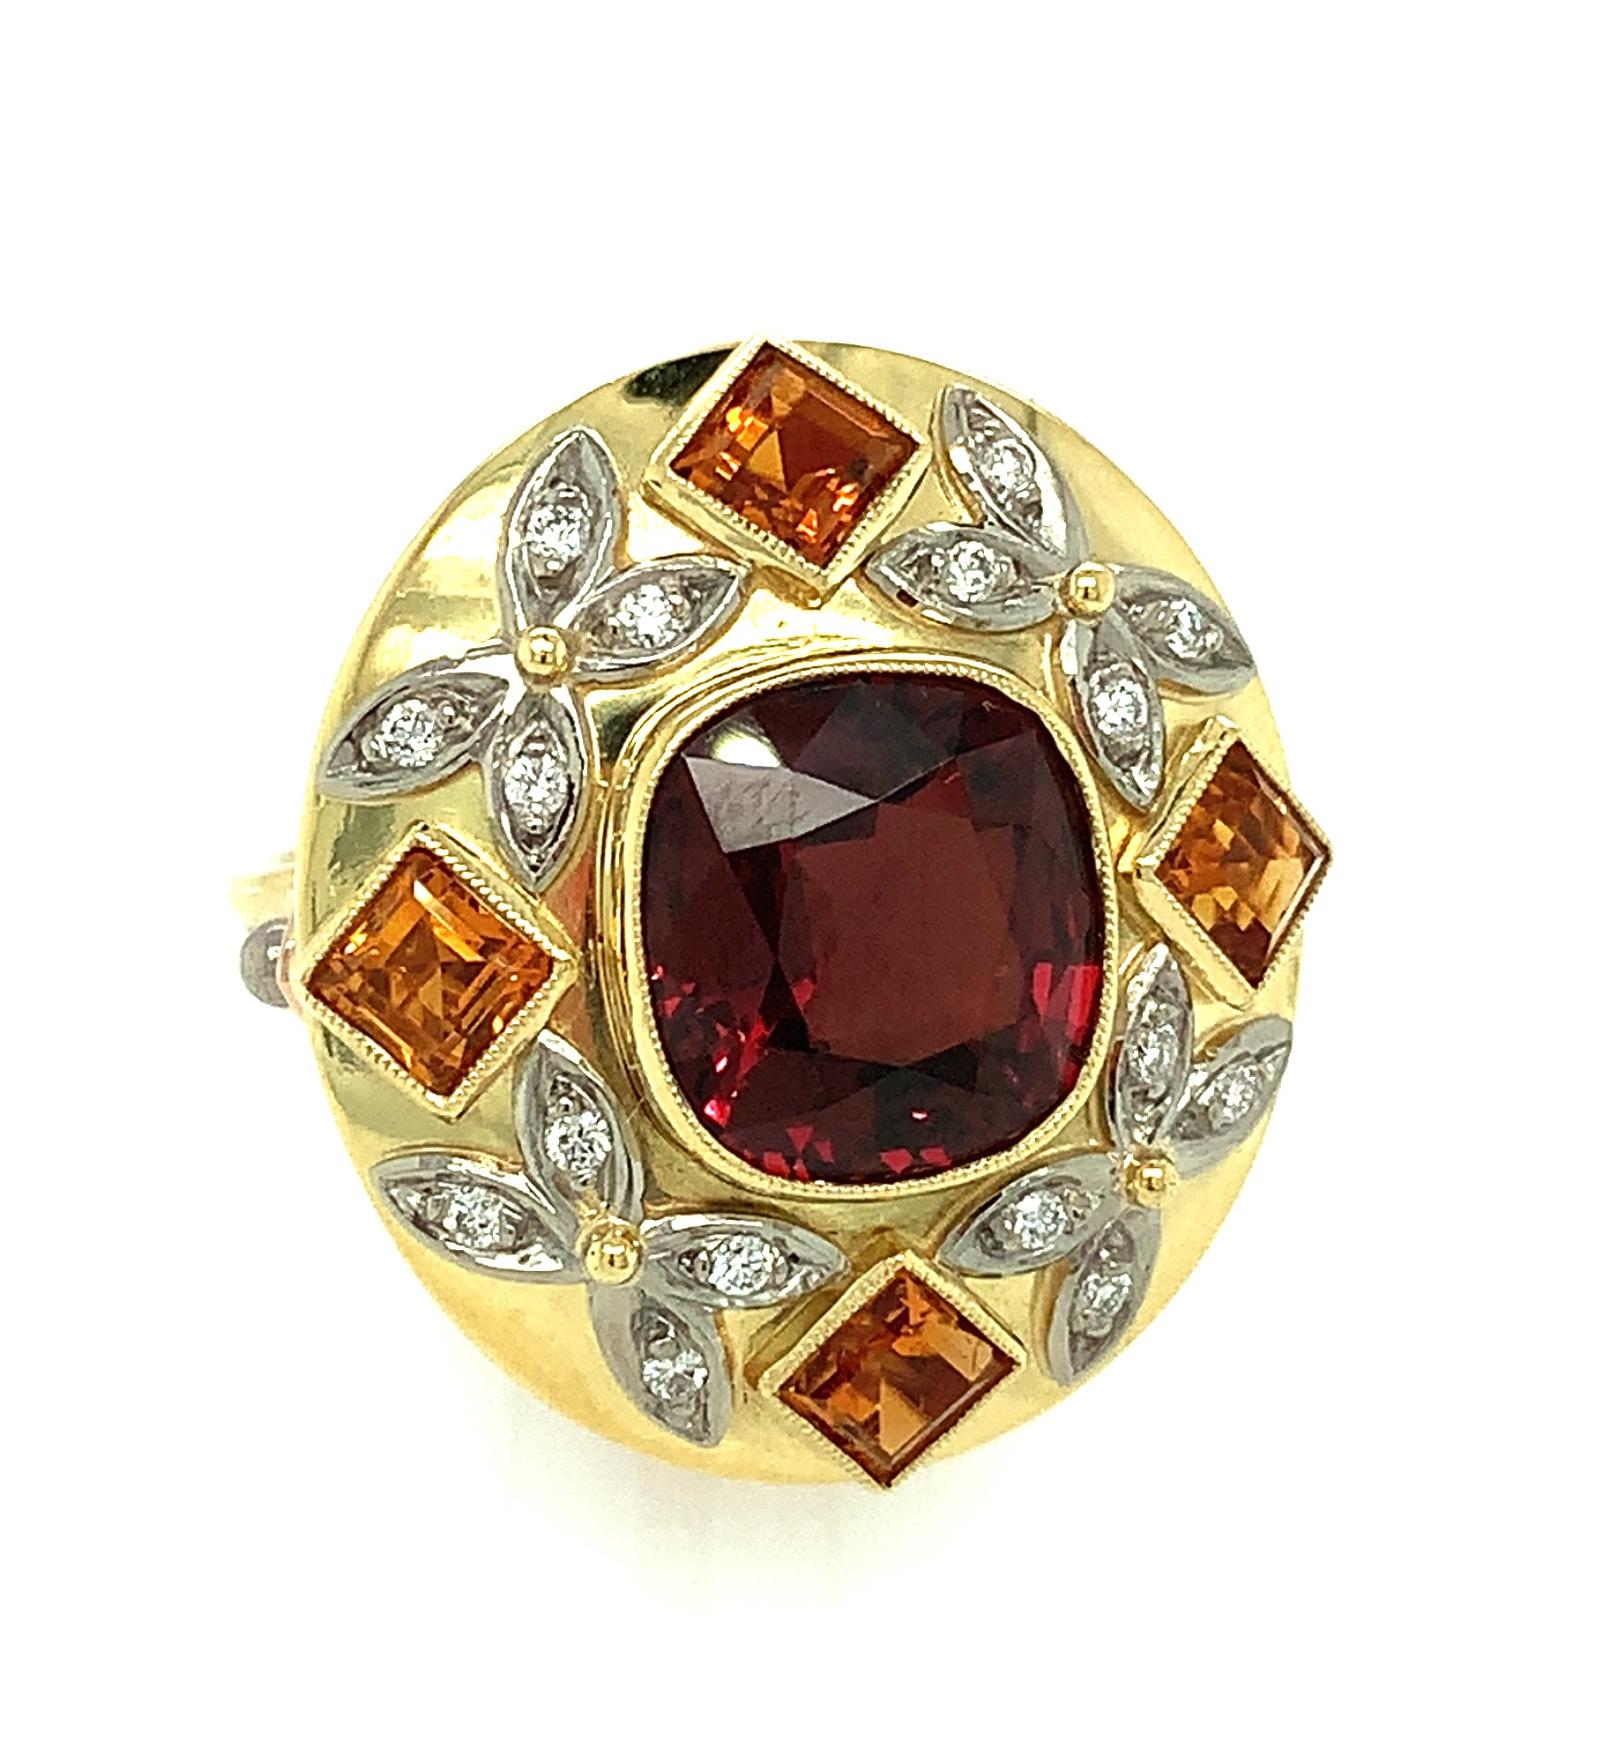 Artisan 5.23 Carat Red Spinel, Citrine and Diamond Cocktail Ring in Tri-colored Gold For Sale